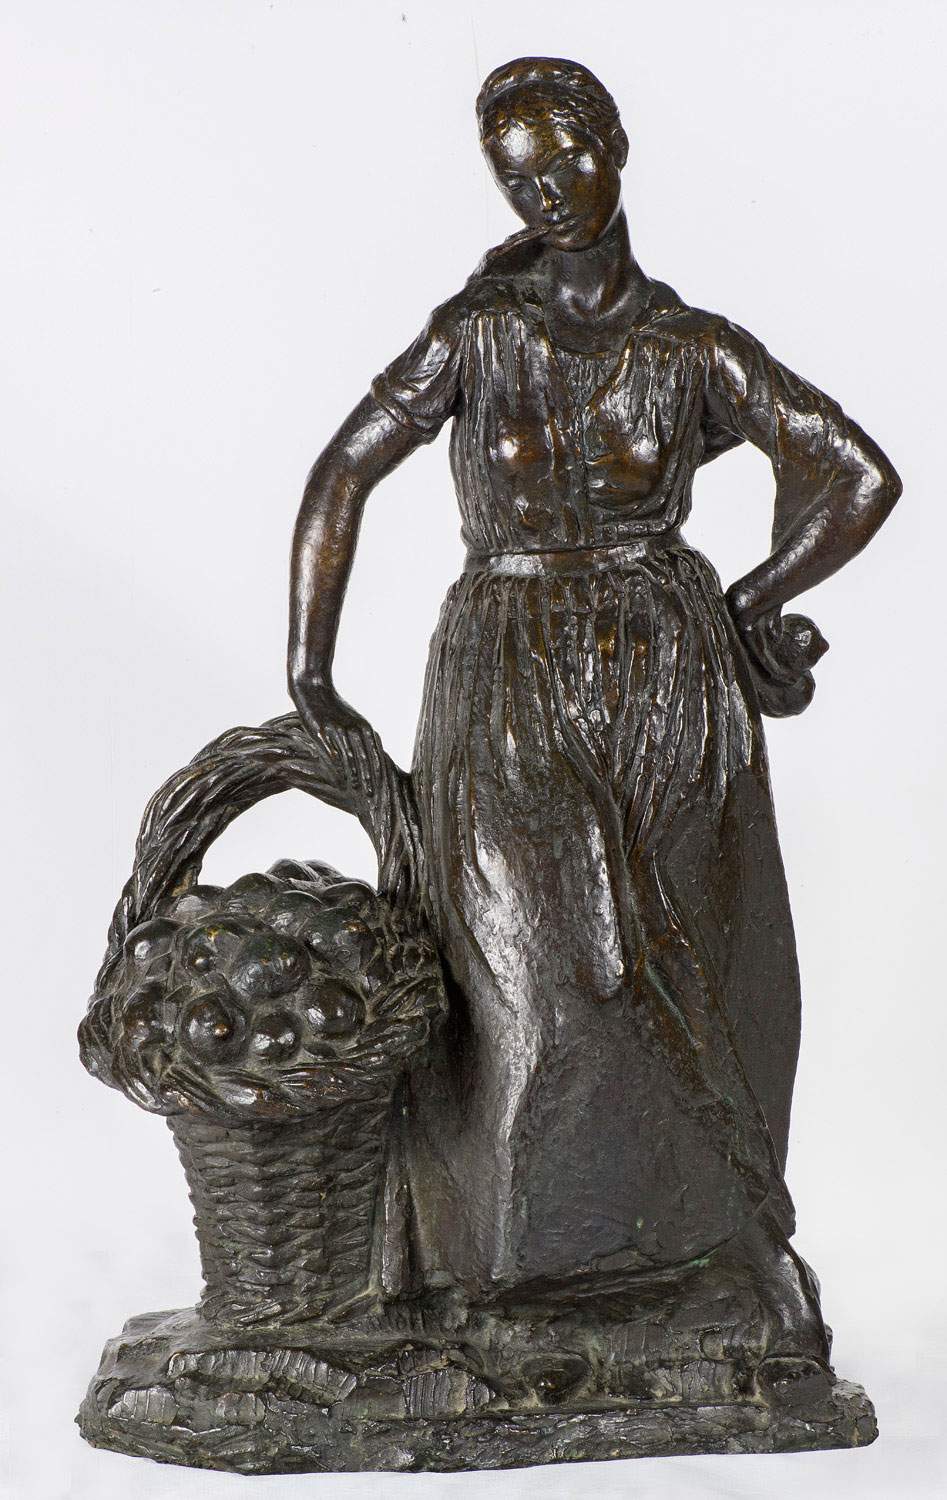 Two bronze sculptures by Libero Andreotti enter the collections of the Pitti Palace